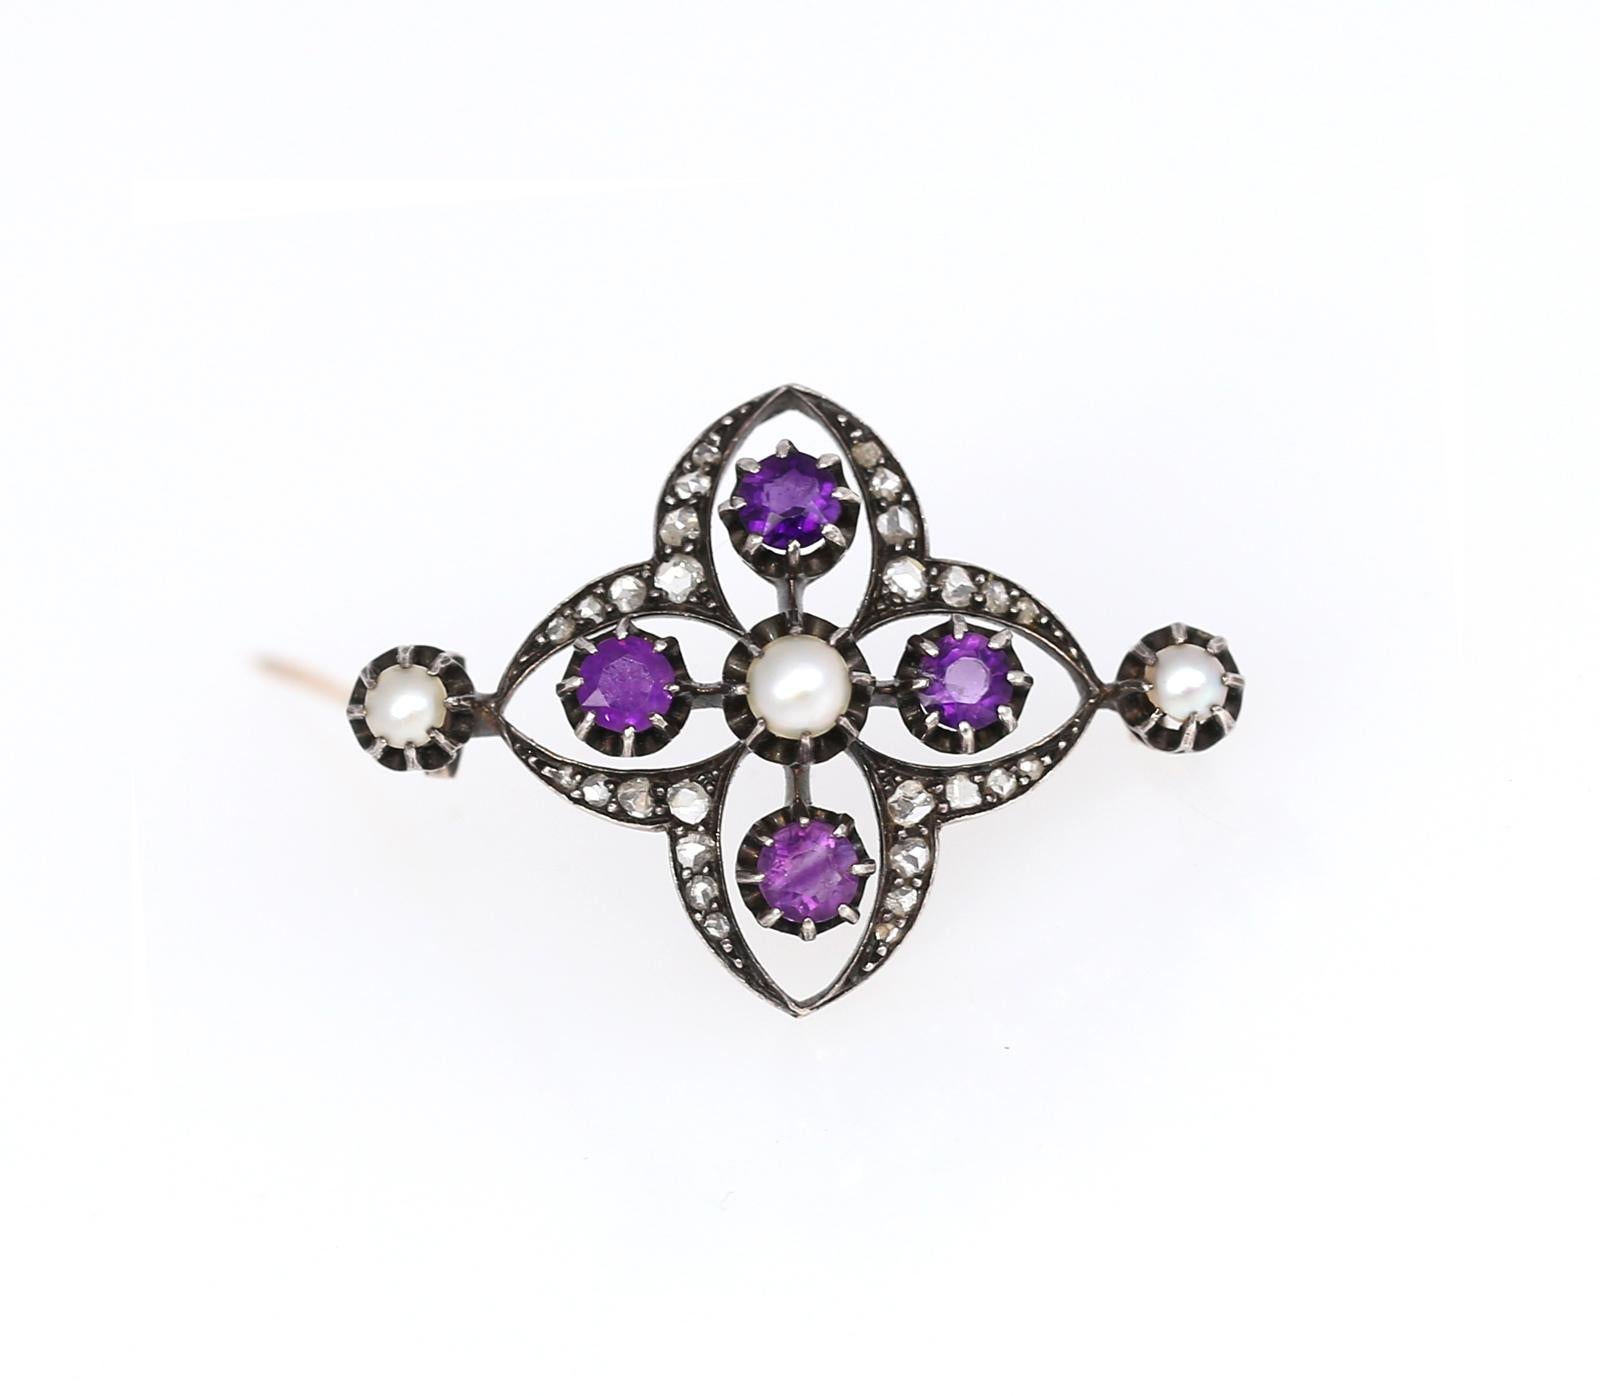 Late Victorian Brooch with four bright Amethysts, three fine Pearls and Rose-cut Diamonds. Set in Silver and Gold. Shaped in natural organic form resembling a flower, yet made in 1900 it has fine geometrical proportions.

Once it was common to